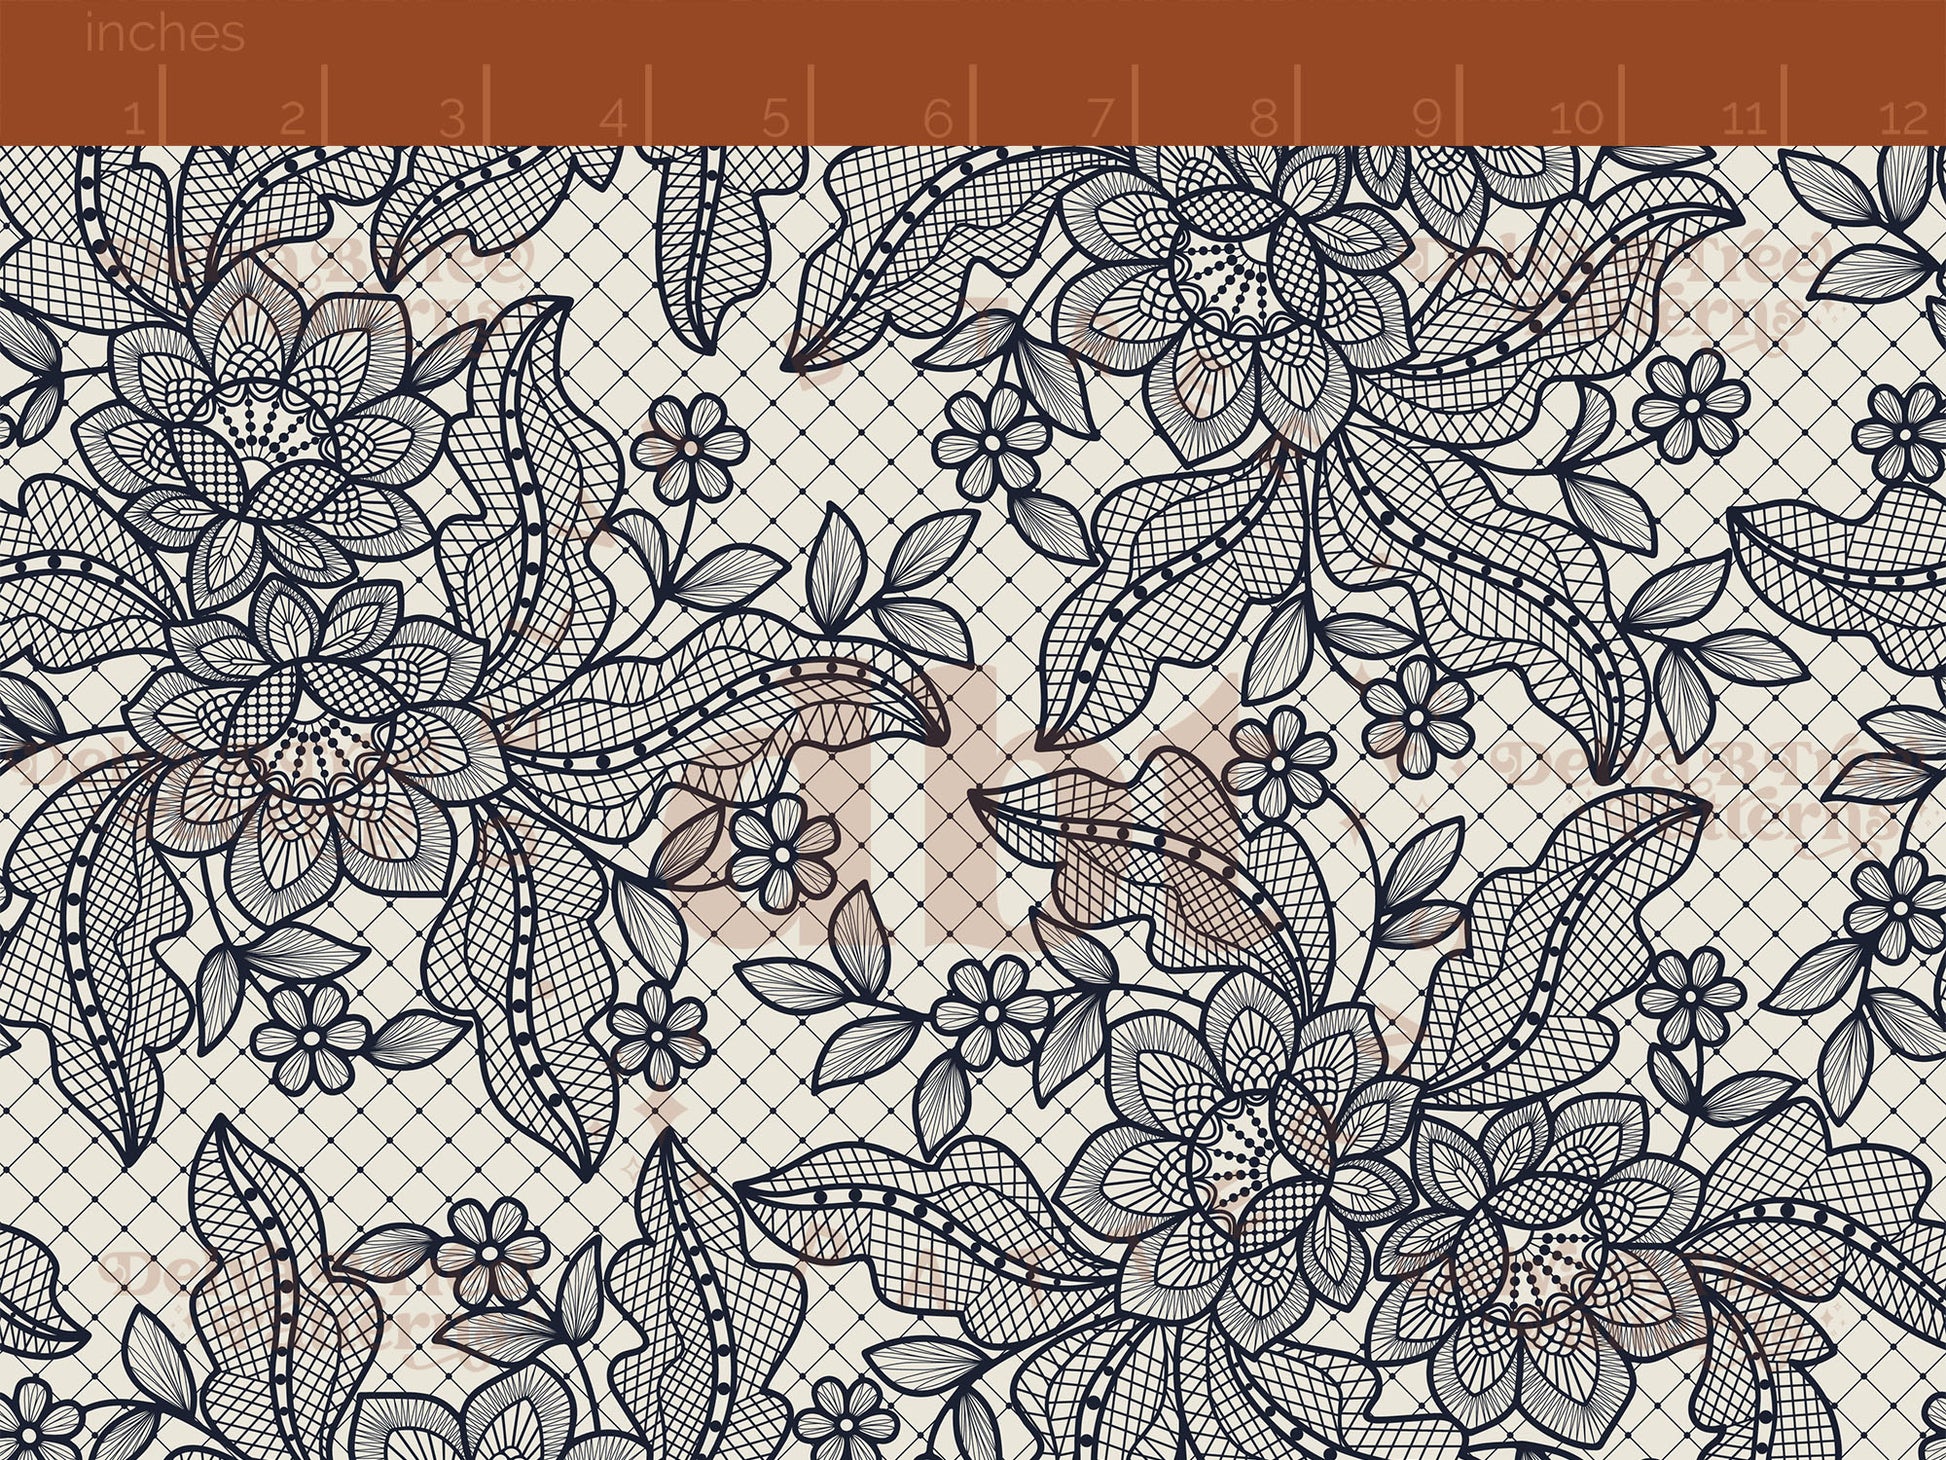 Pastel summer floral digital seamless pattern for fabrics and